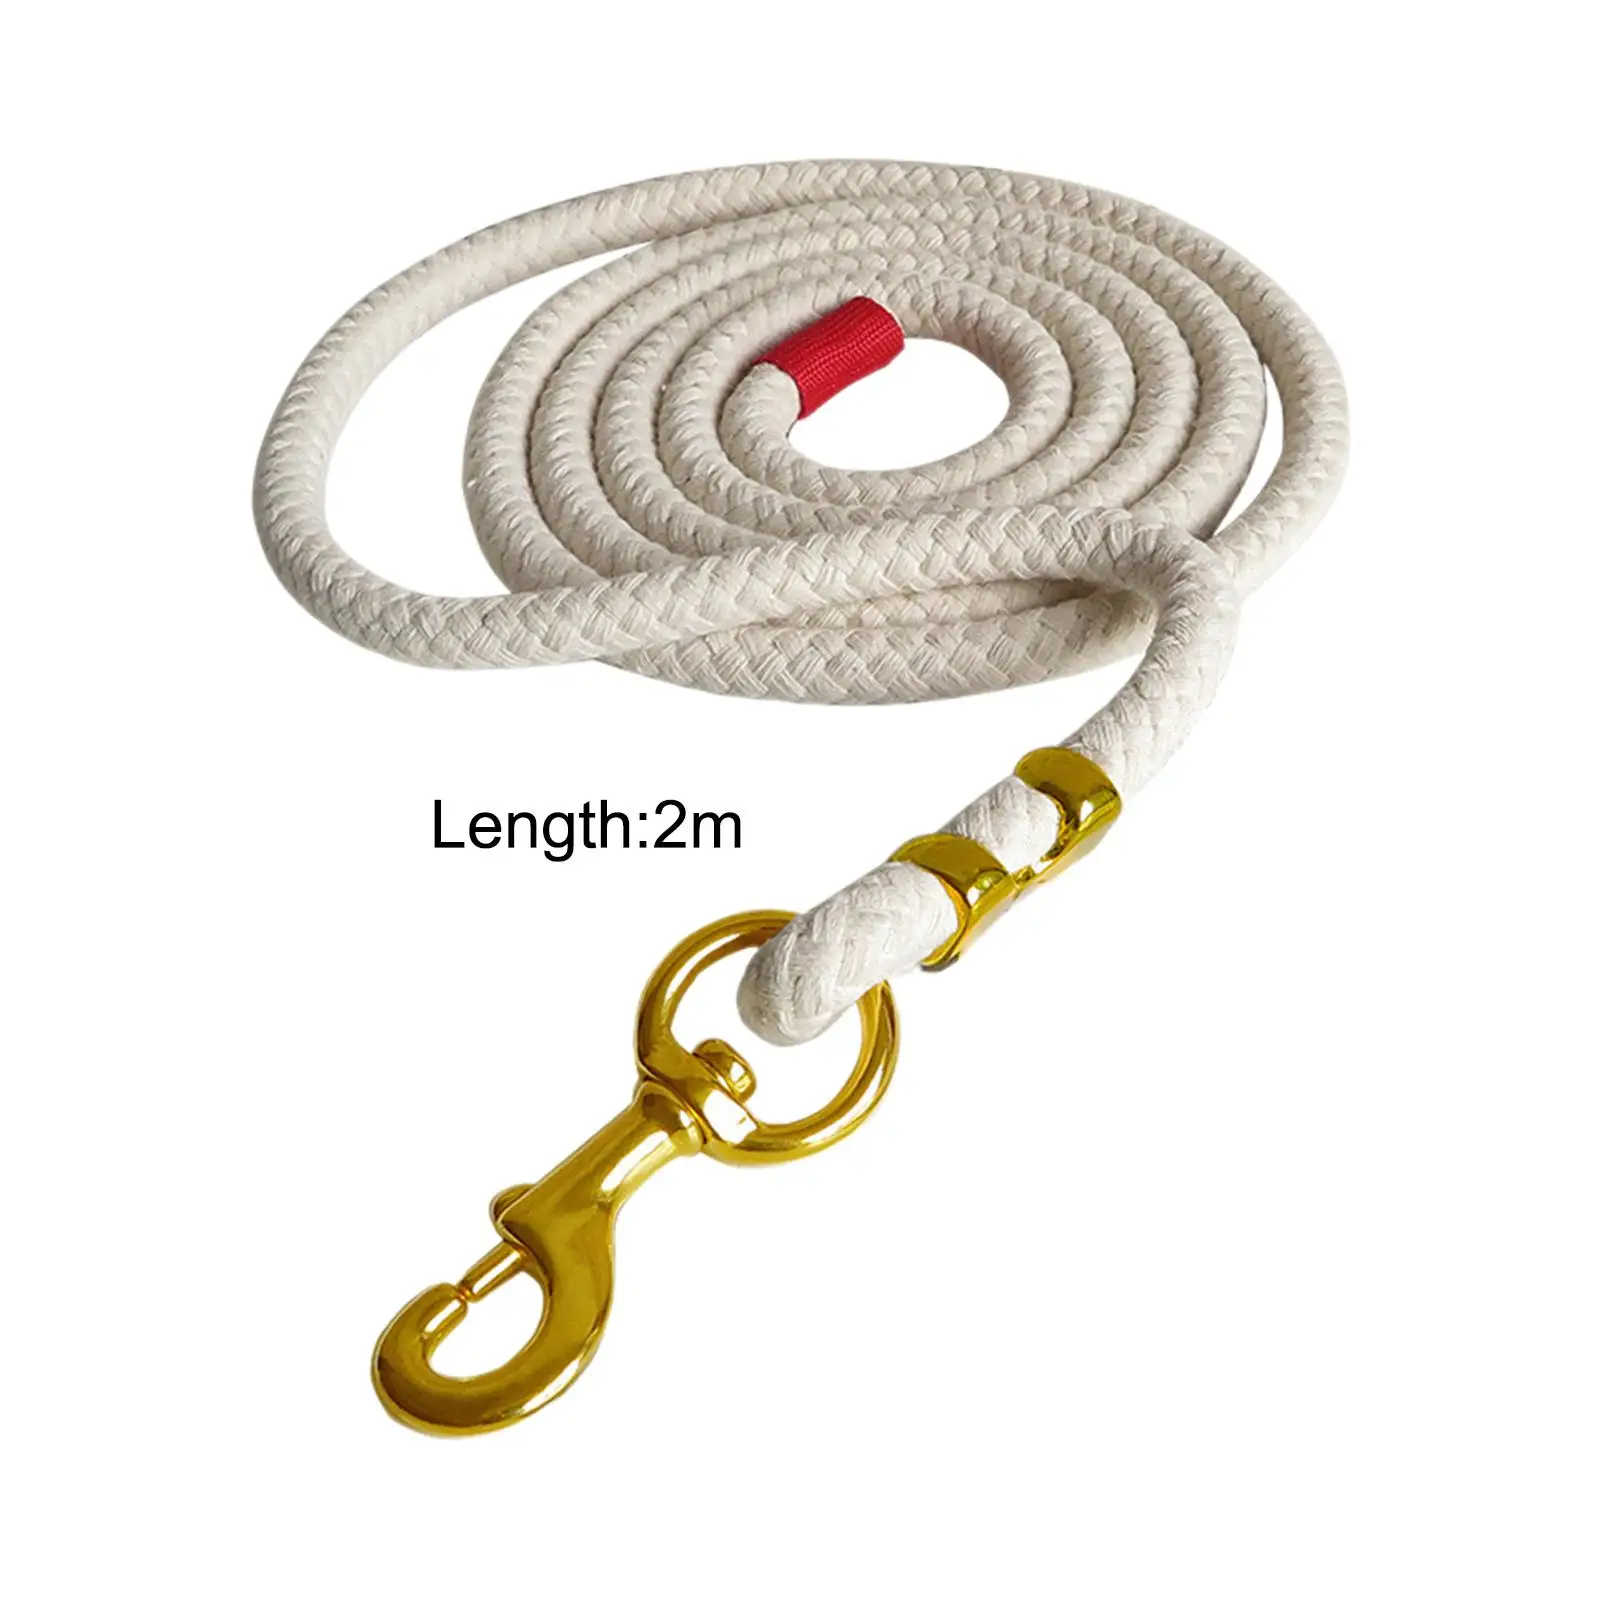 Horse Lead Rope Horse Rope Leash Horse Leads for Training & Walking with Swivel Clip Dog Horse Training Lunge Tracking Leash